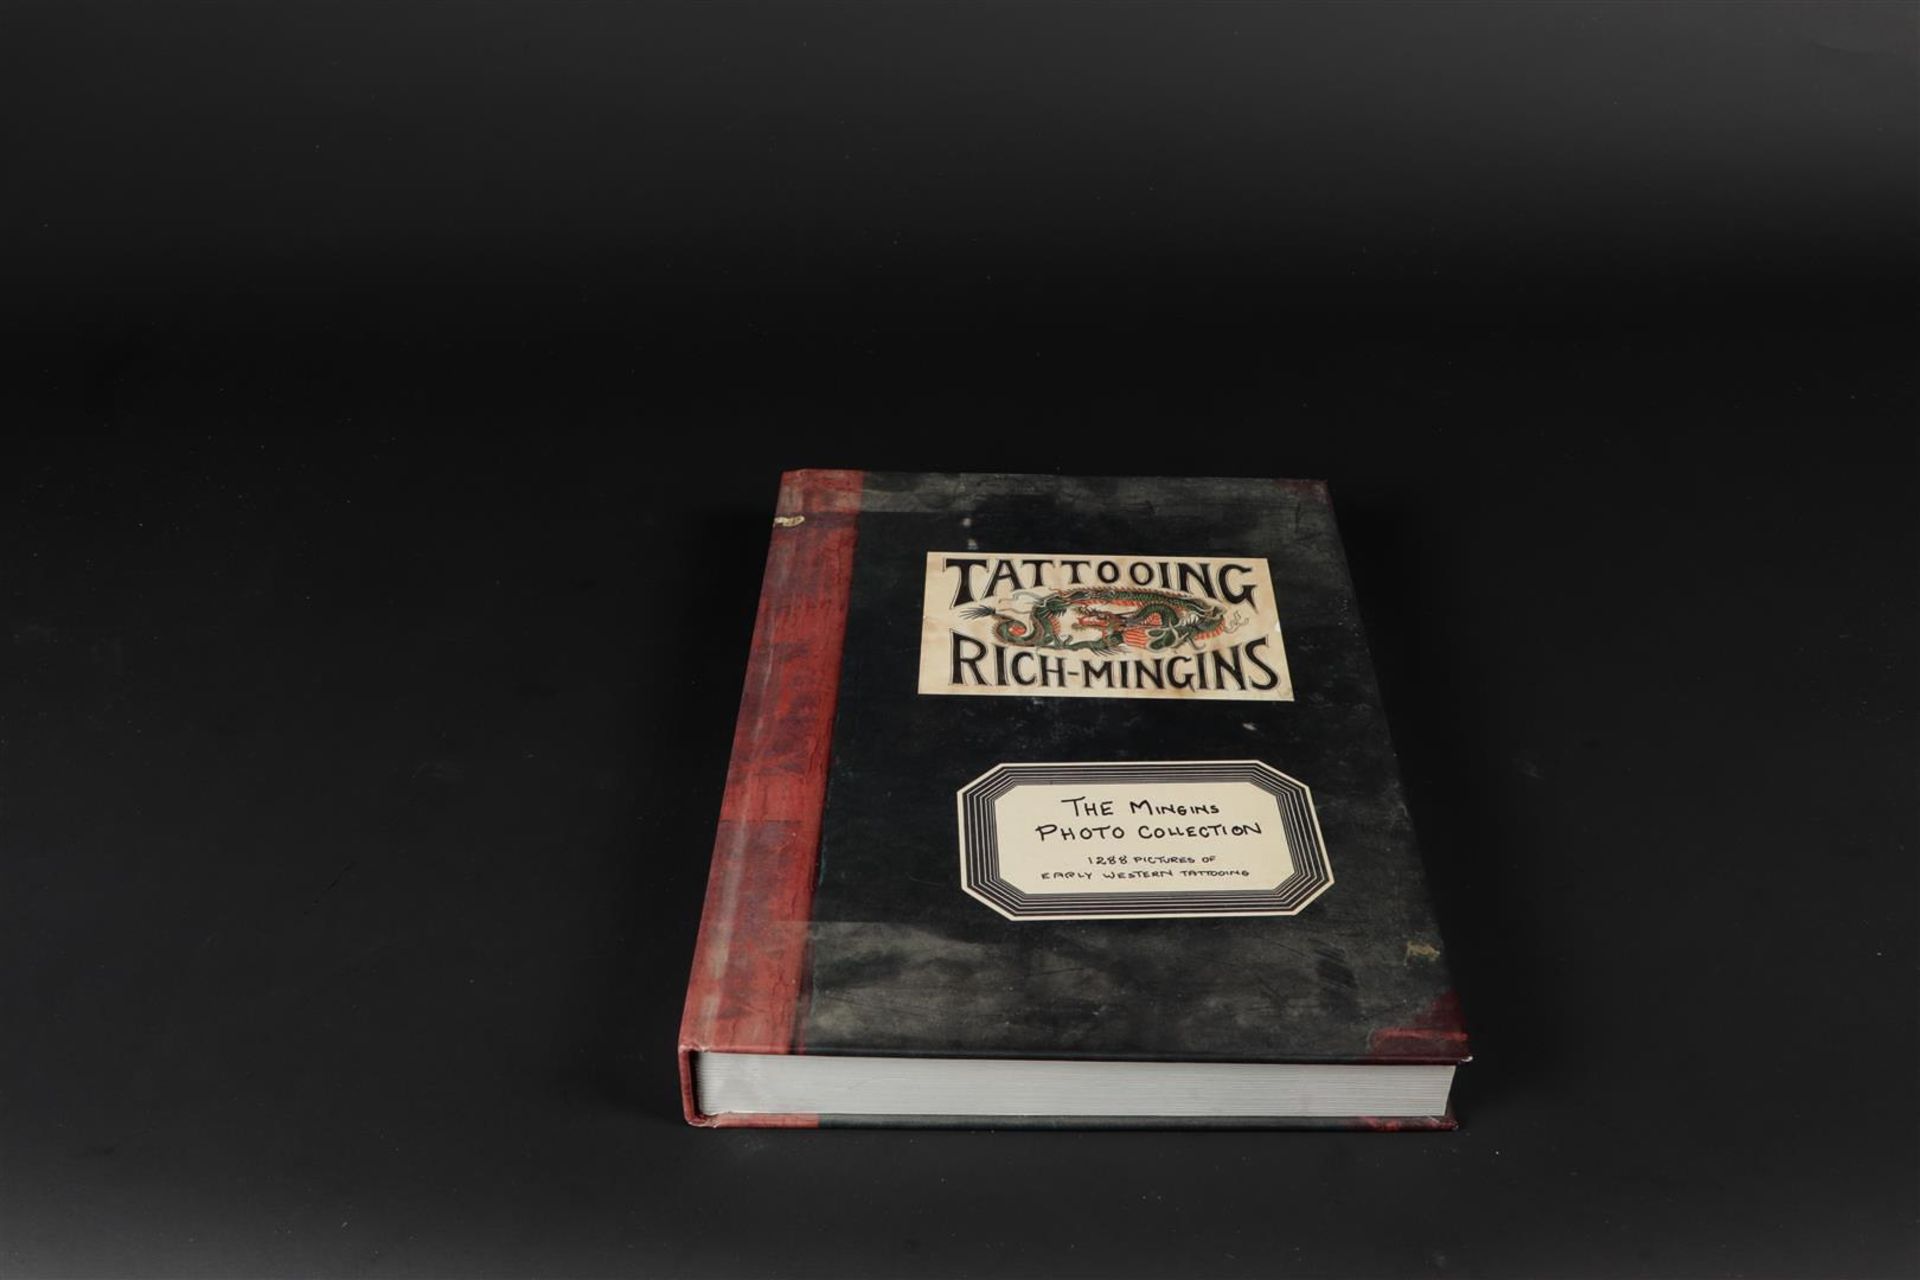 Collection of books including The Mingins Photo Collection: 1288 Pictures of Early Western Tattooing - Image 2 of 3